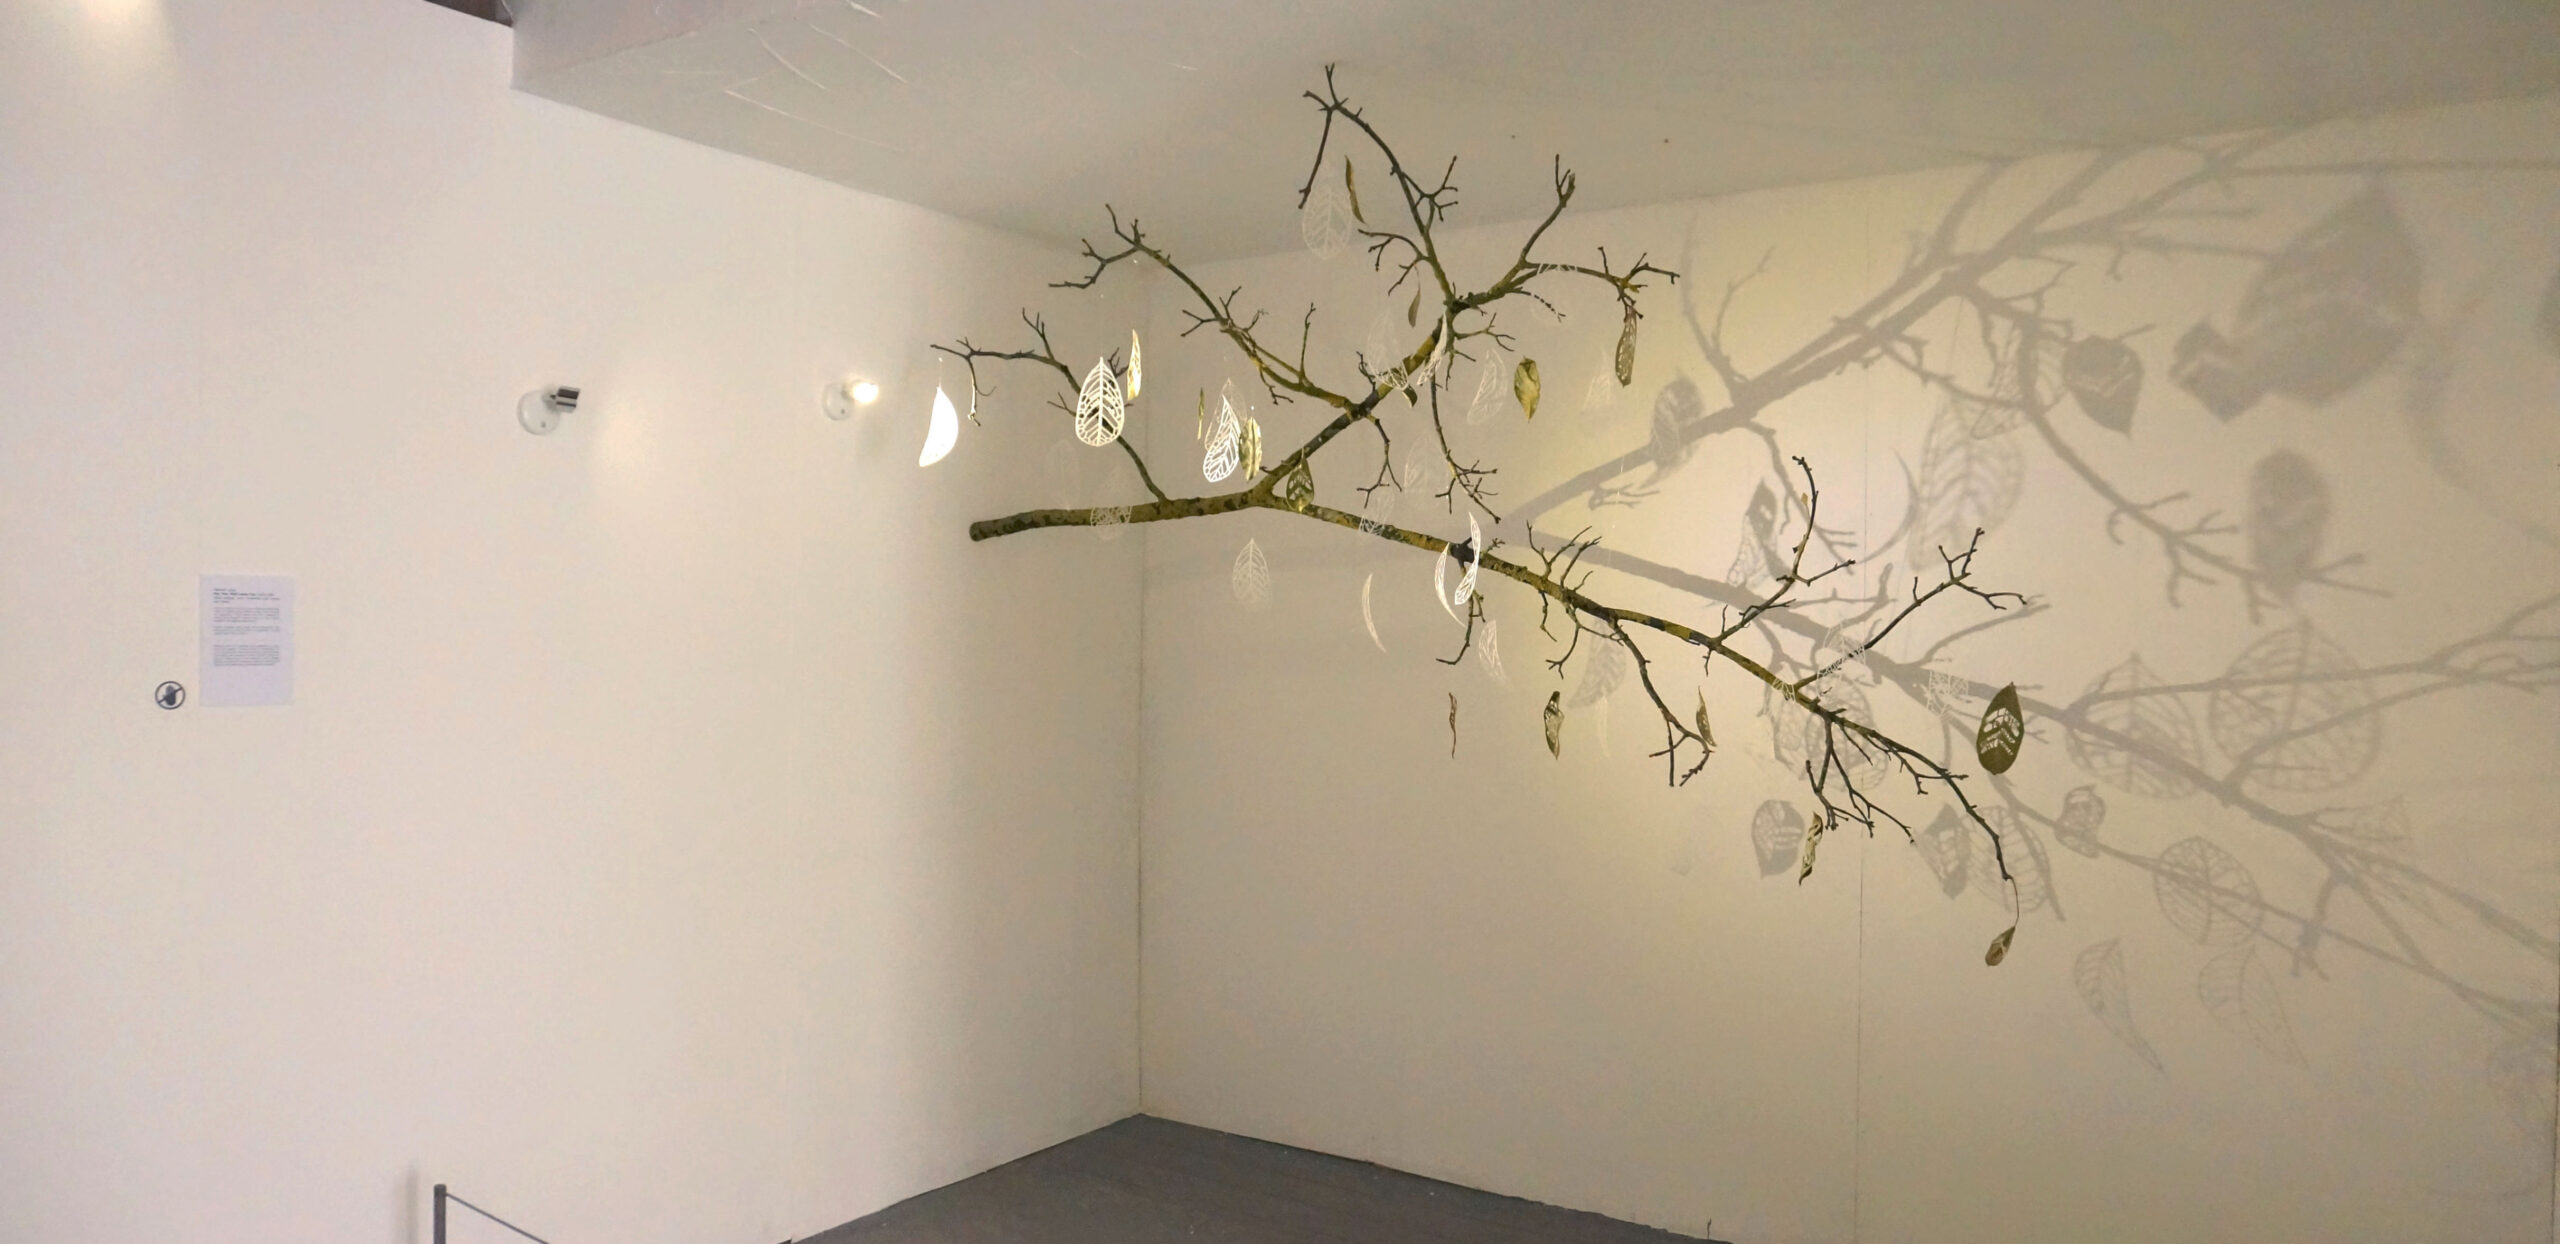 A mixed-media art installation made of carved leaves, glass leaves and a tree branch